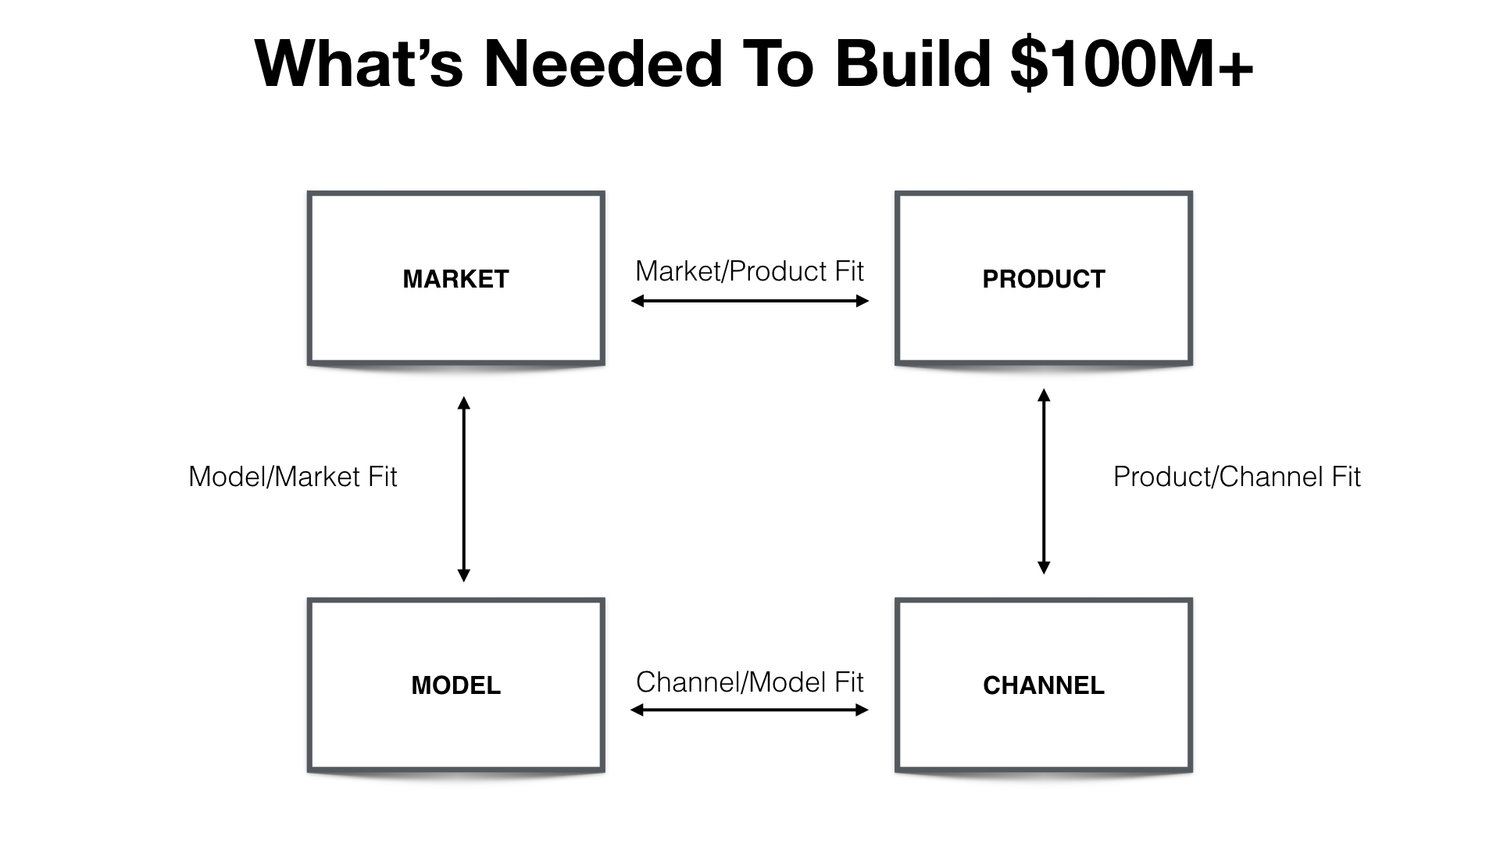 Product channel. Product channel Fit. Product-model-channel Fit. Channel модели. Market products.